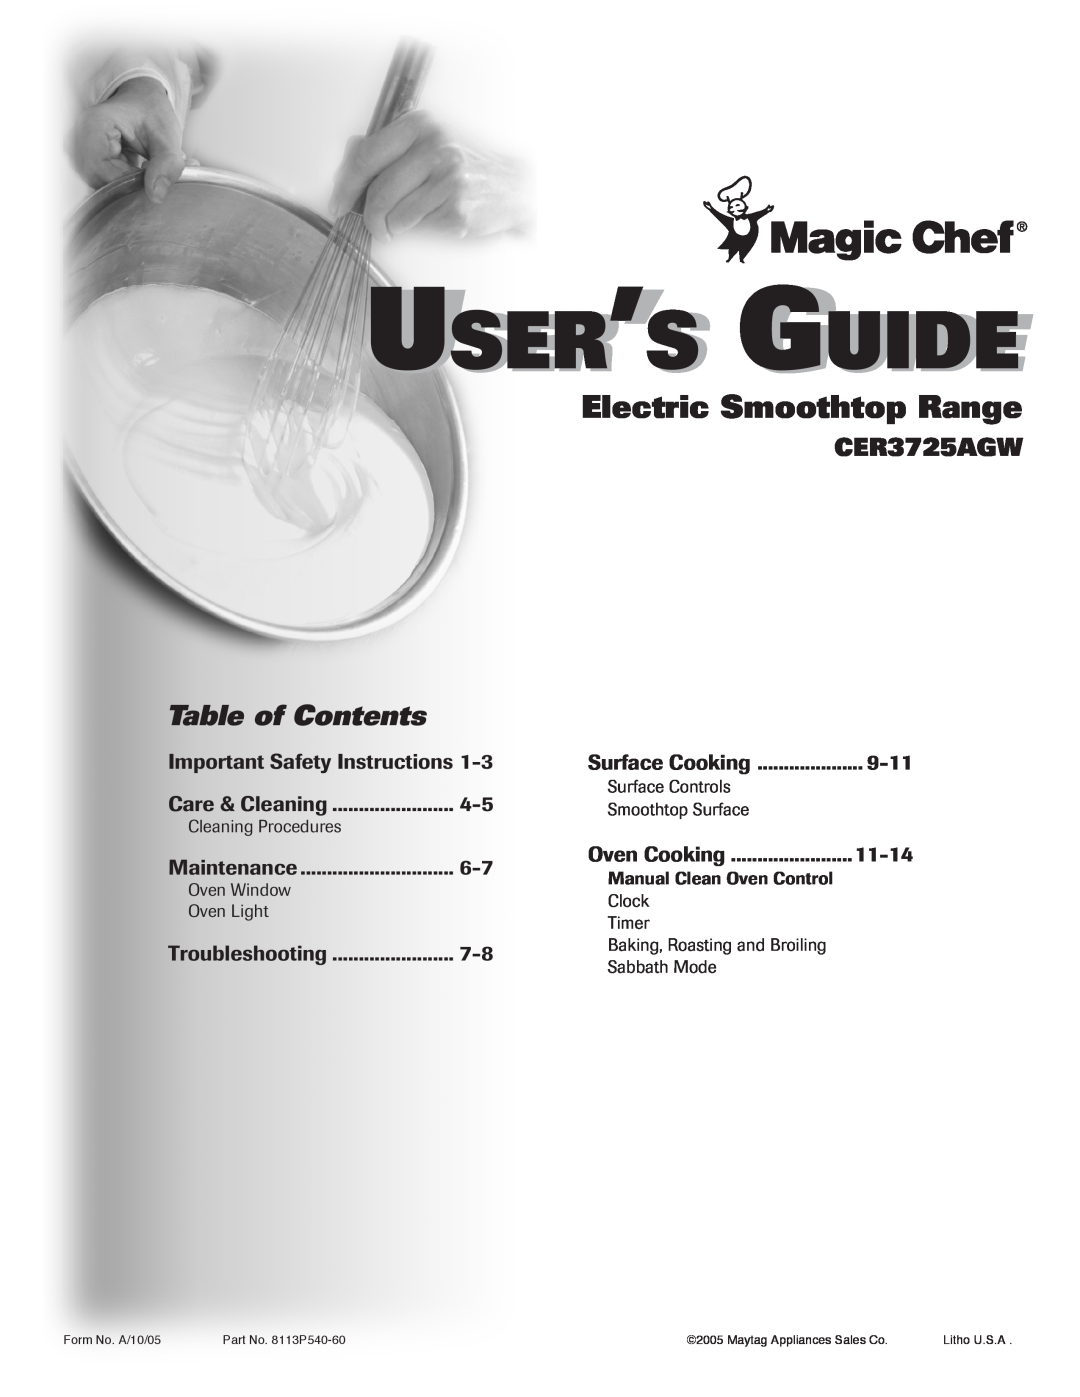 Maytag CER3725AGW important safety instructions User’S Guide, Electric Smoothtop Range, Table of Contents 